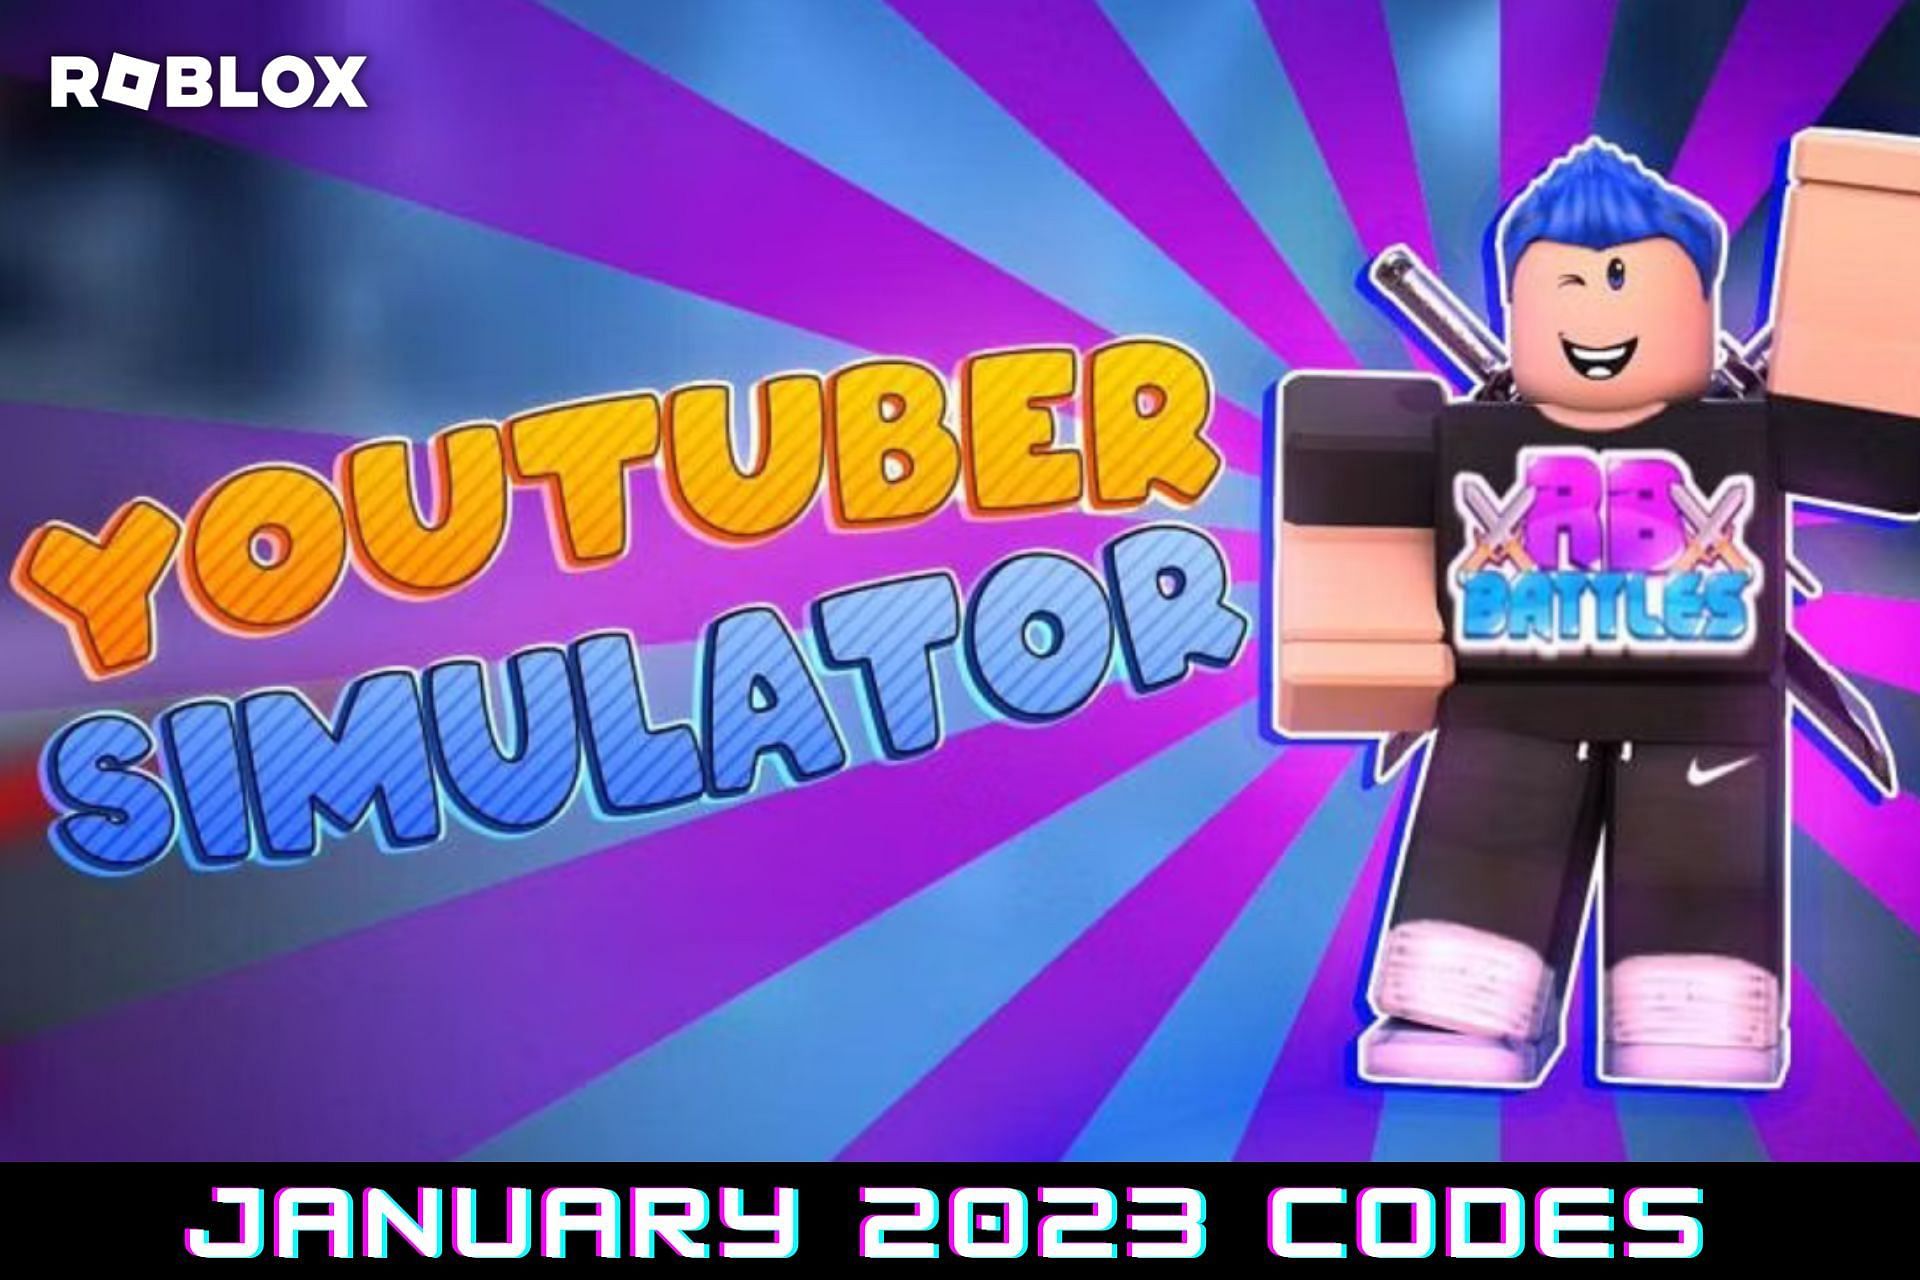 roblox-youtube-simulator-codes-for-january-2023-free-rewards